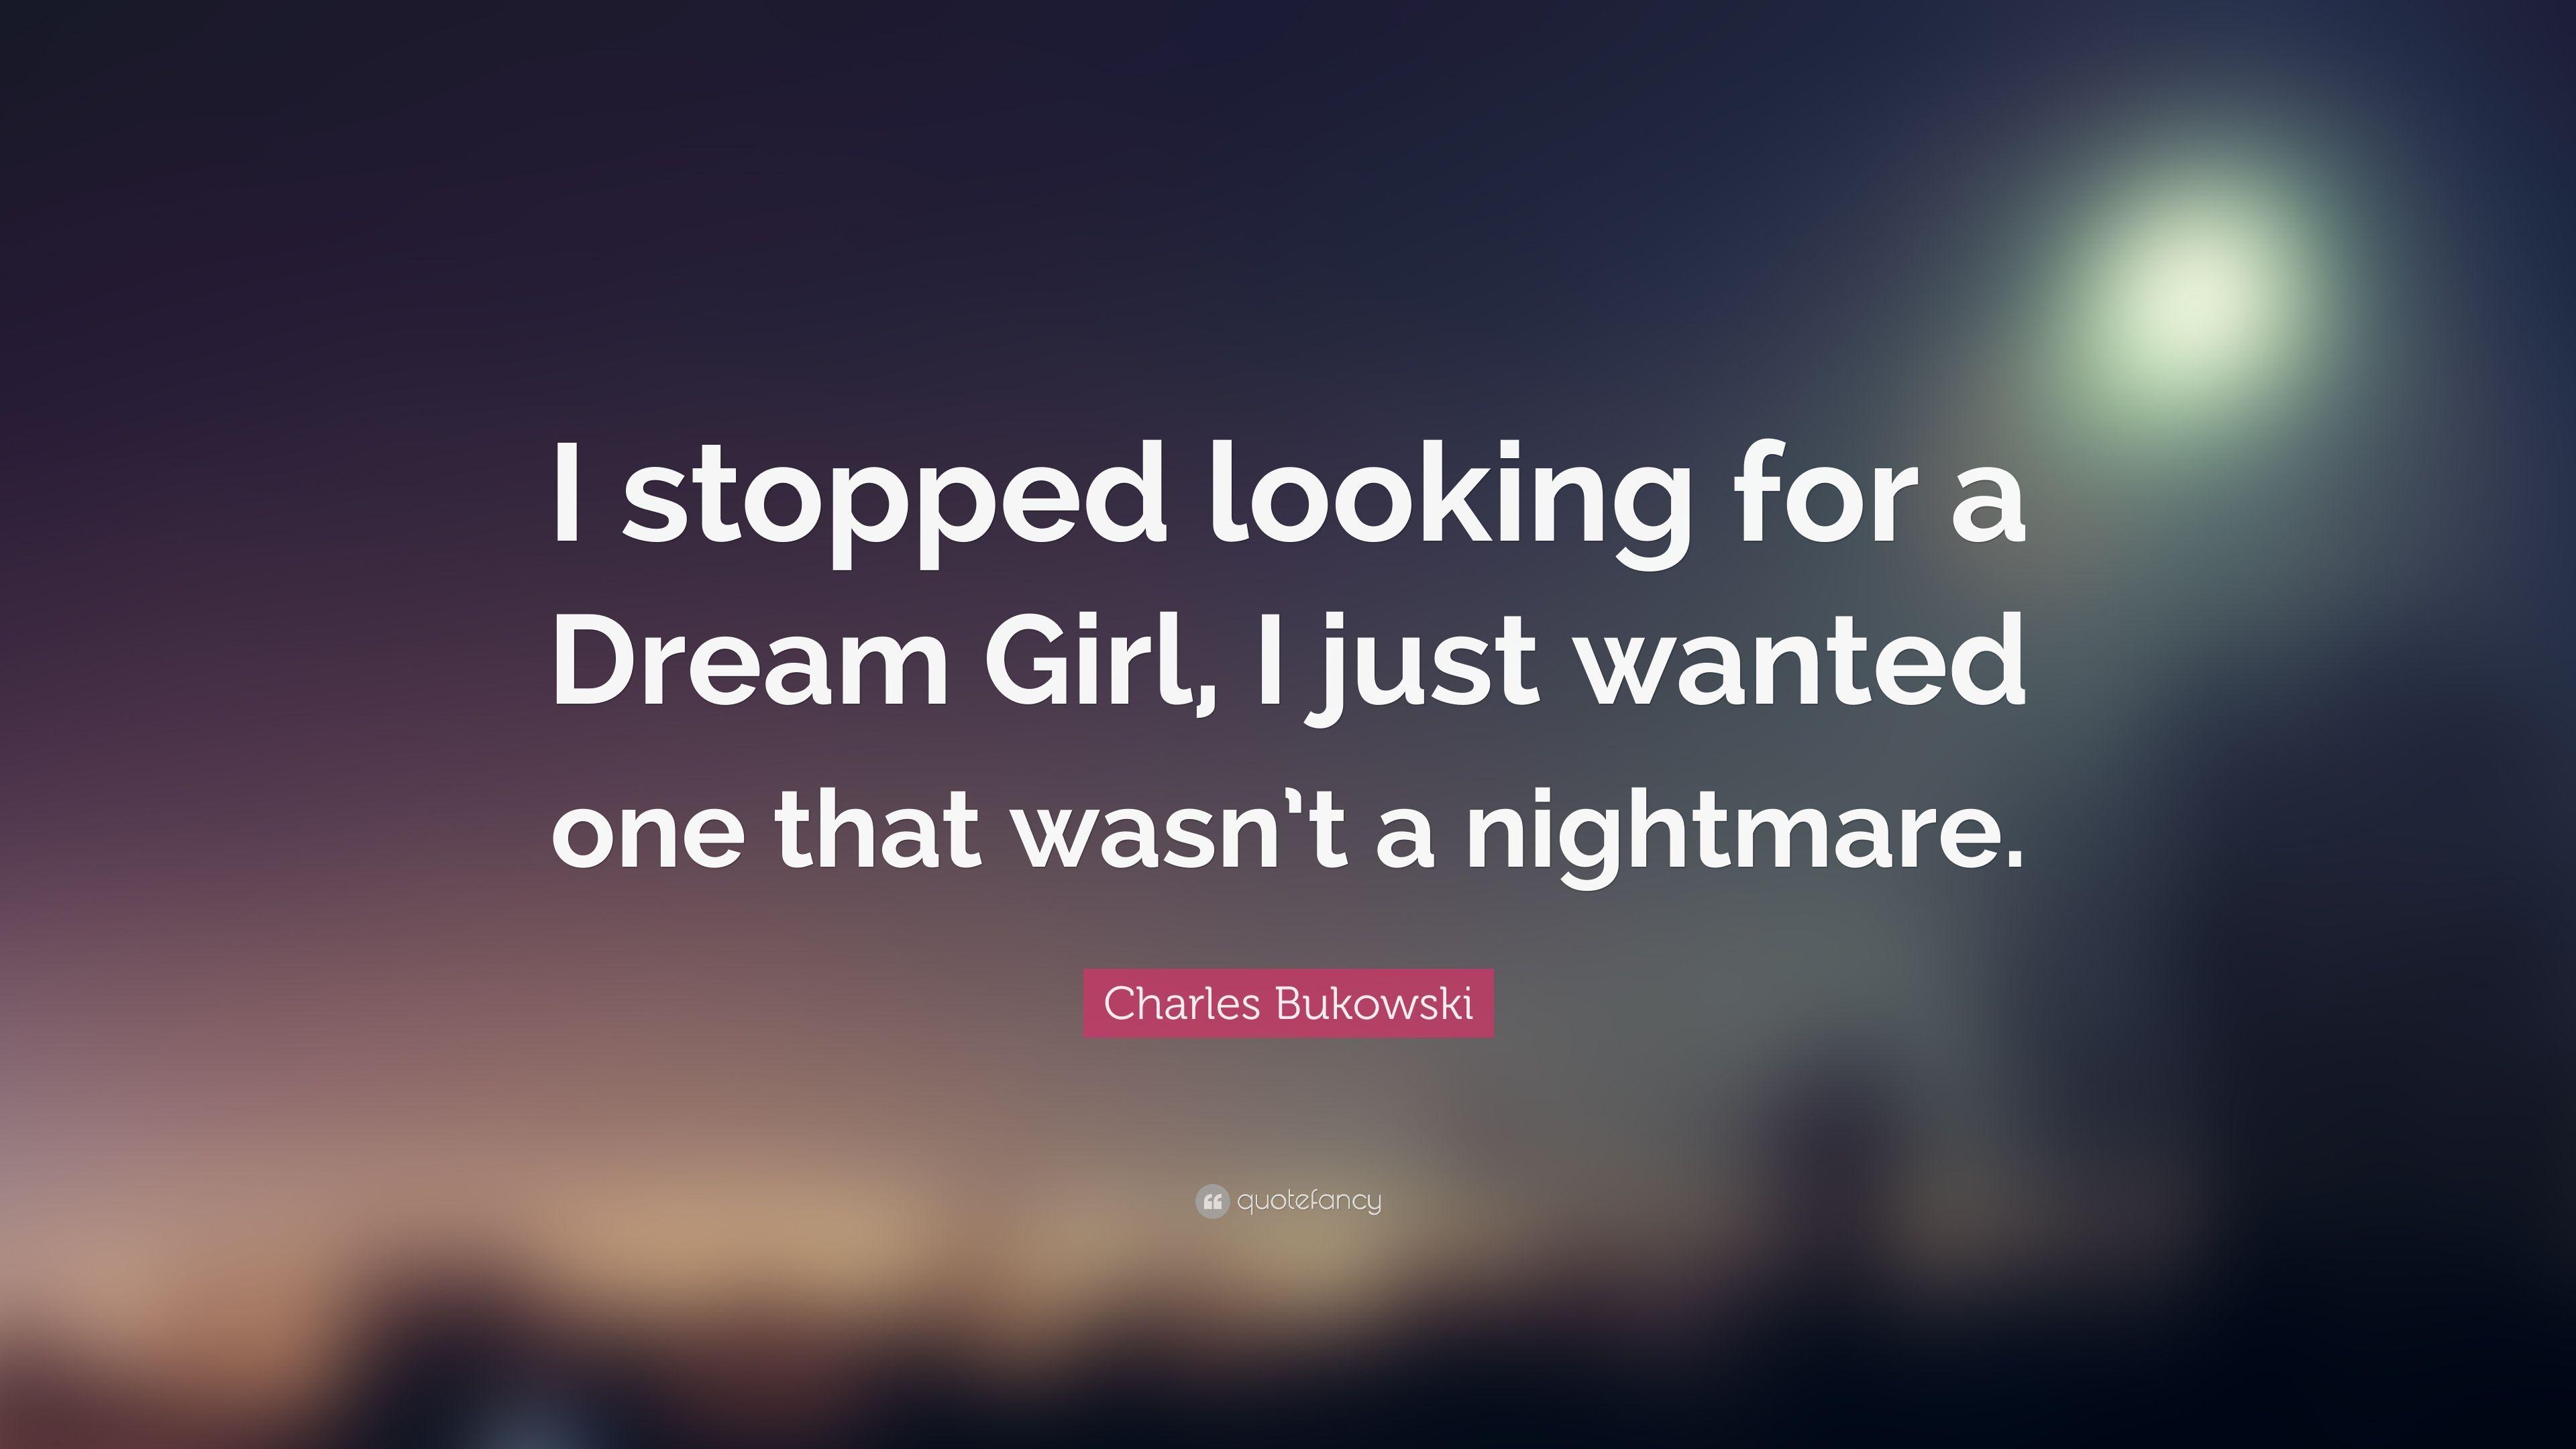 Charles Bukowski Quote: “I stopped looking for a Dream Girl, I just